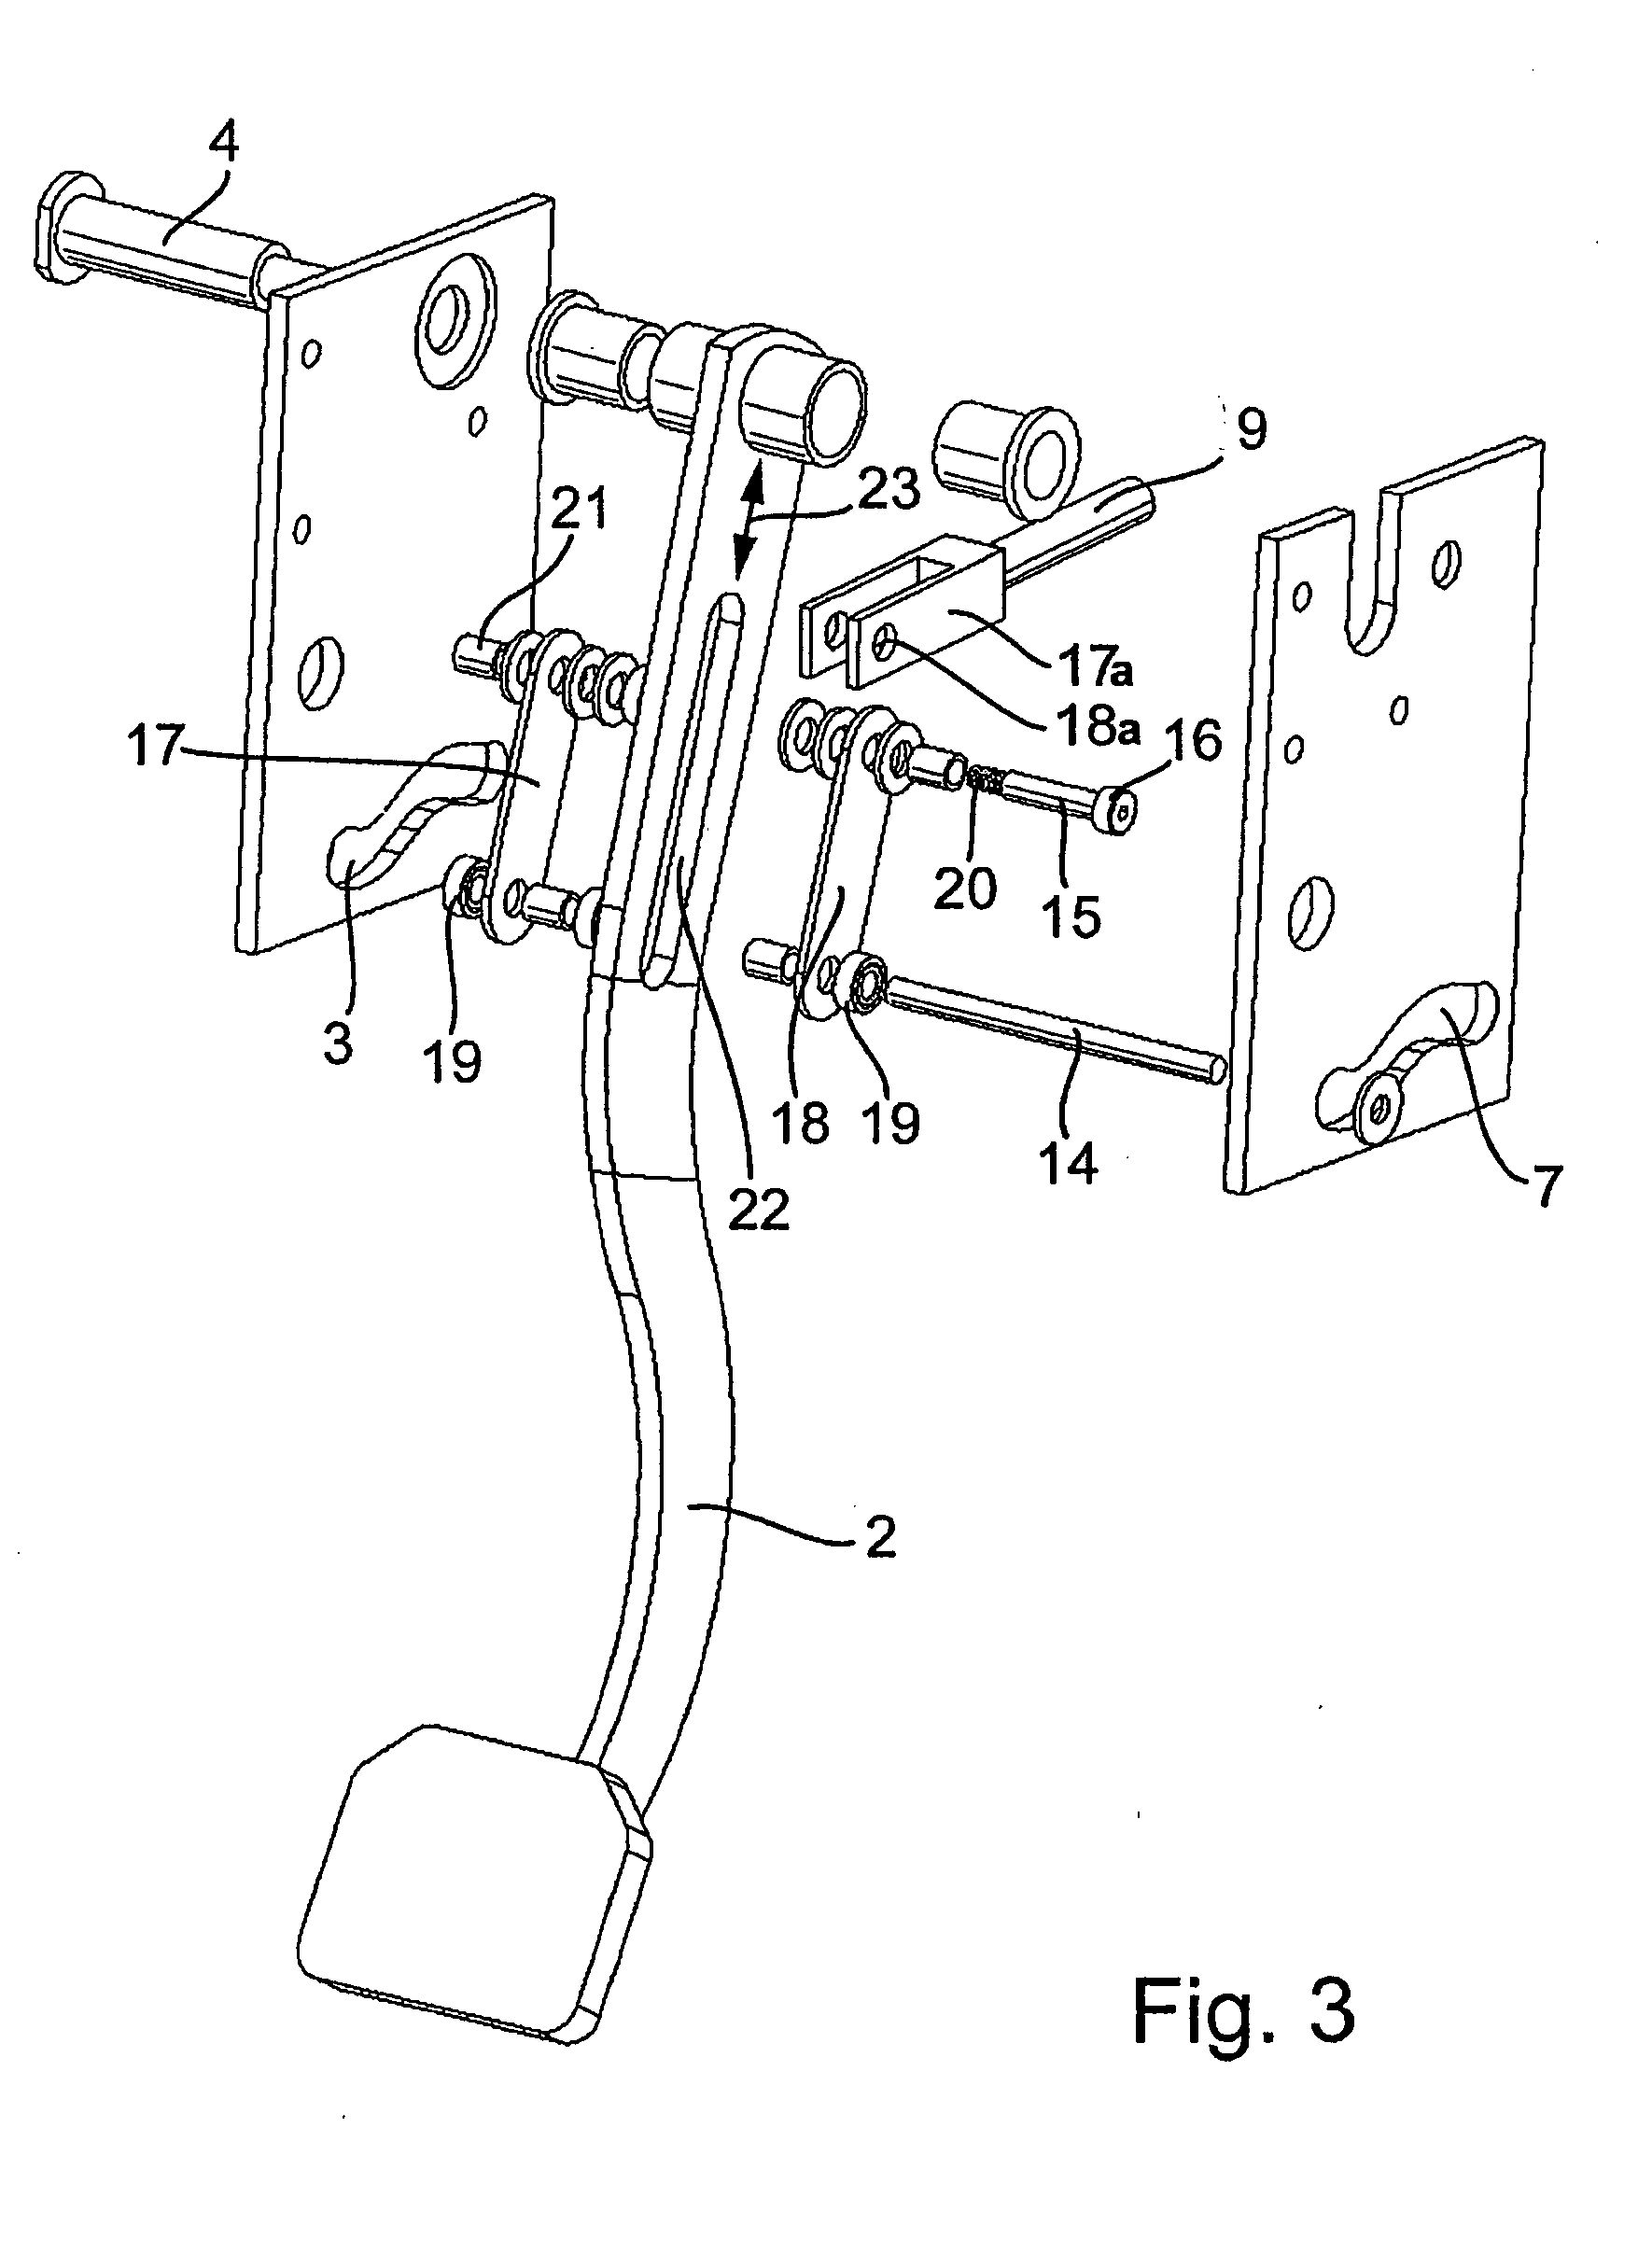 Pedal arrangement for operating a clutch